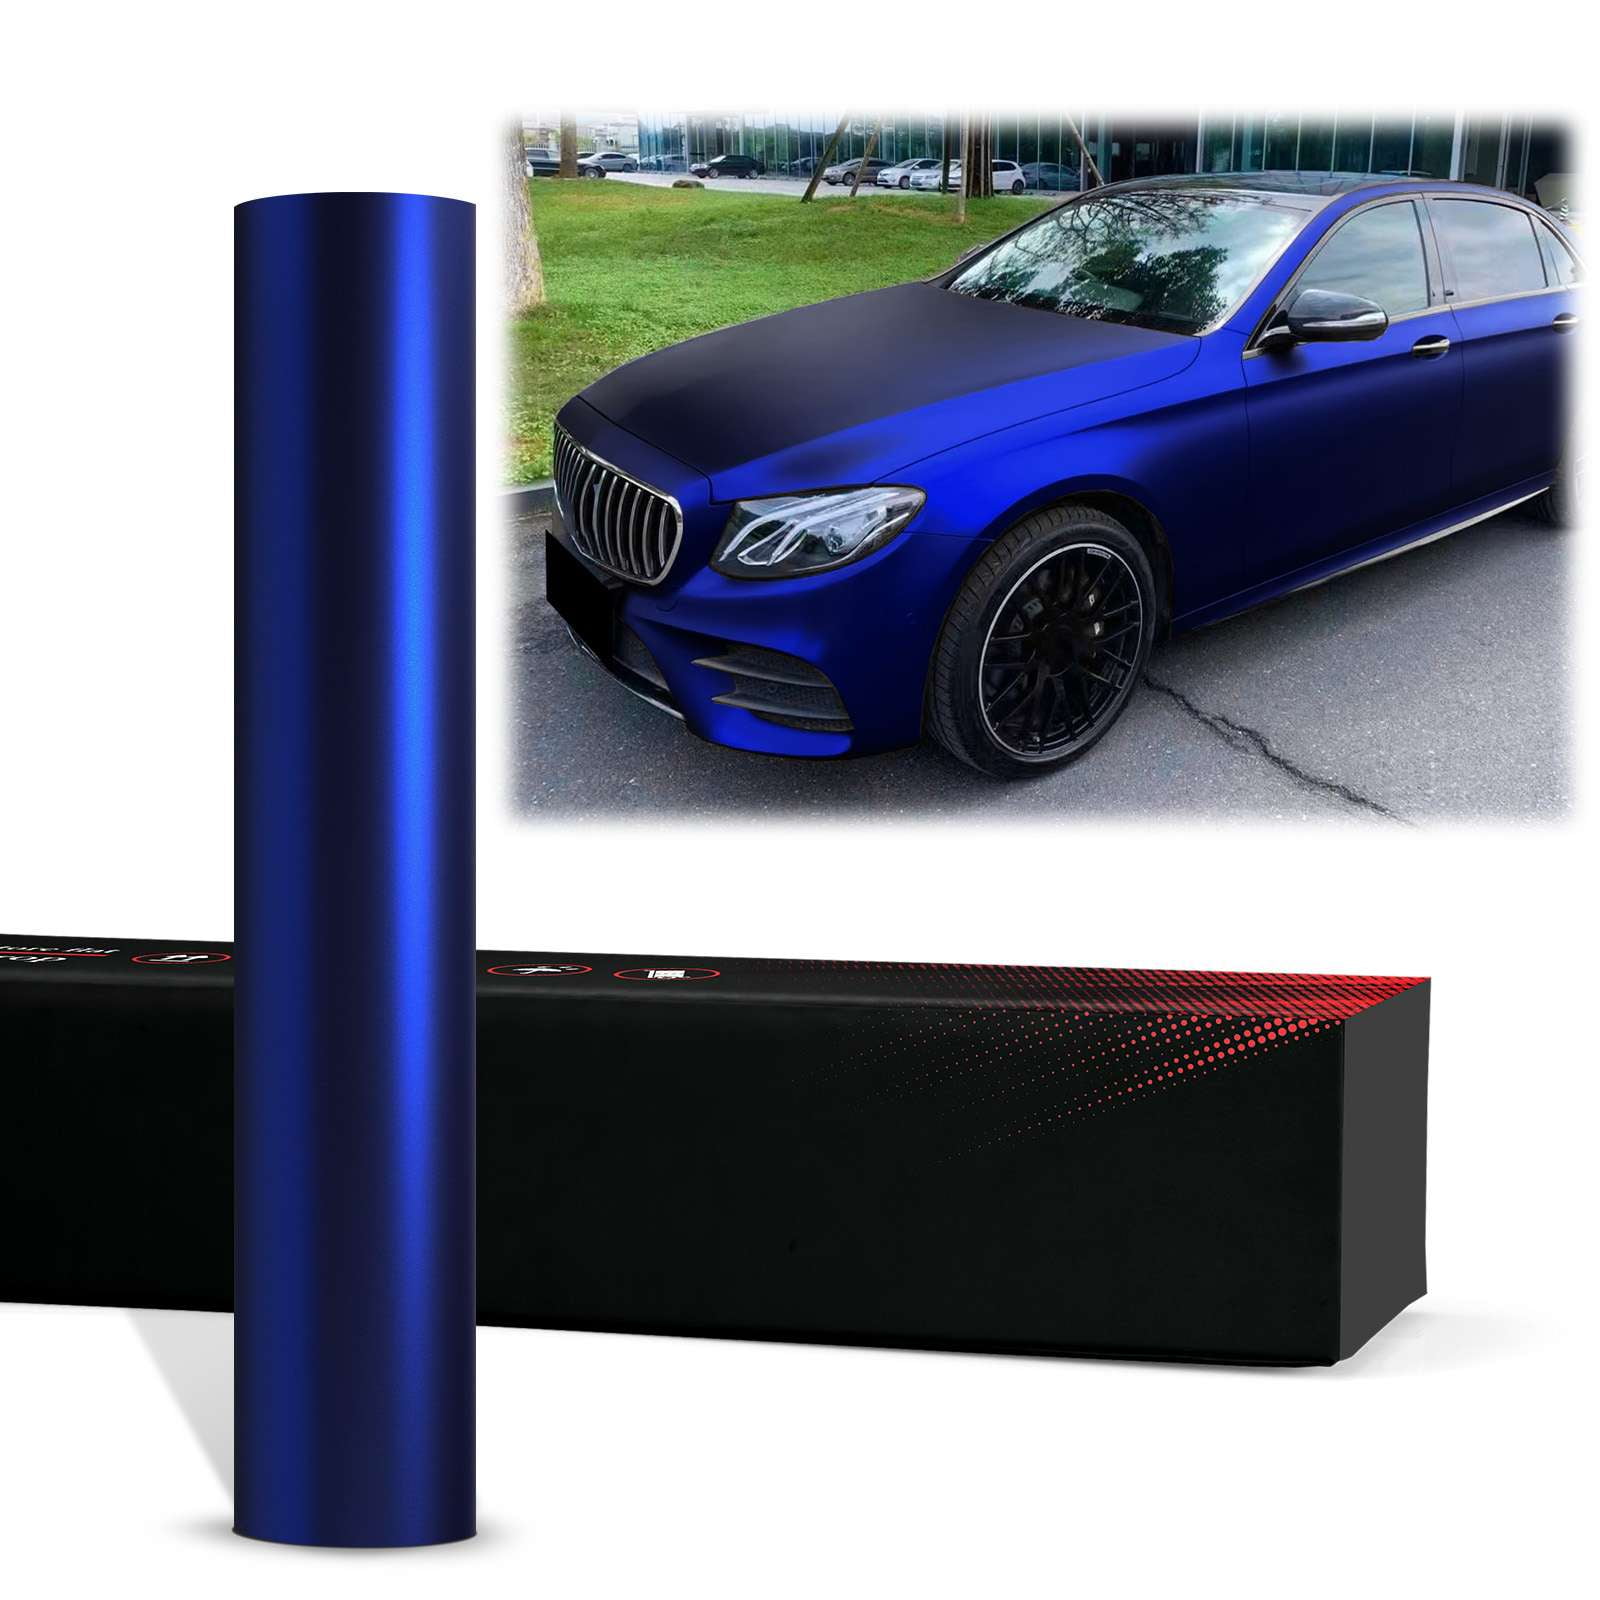 DIYAH Gloss Chrome Mirror Vinyl Car Wrap Sticker with Air Release Bubble Free Anti-Wrinkle 12 x 60 ( 1 ft x 5ft ) (Blue)